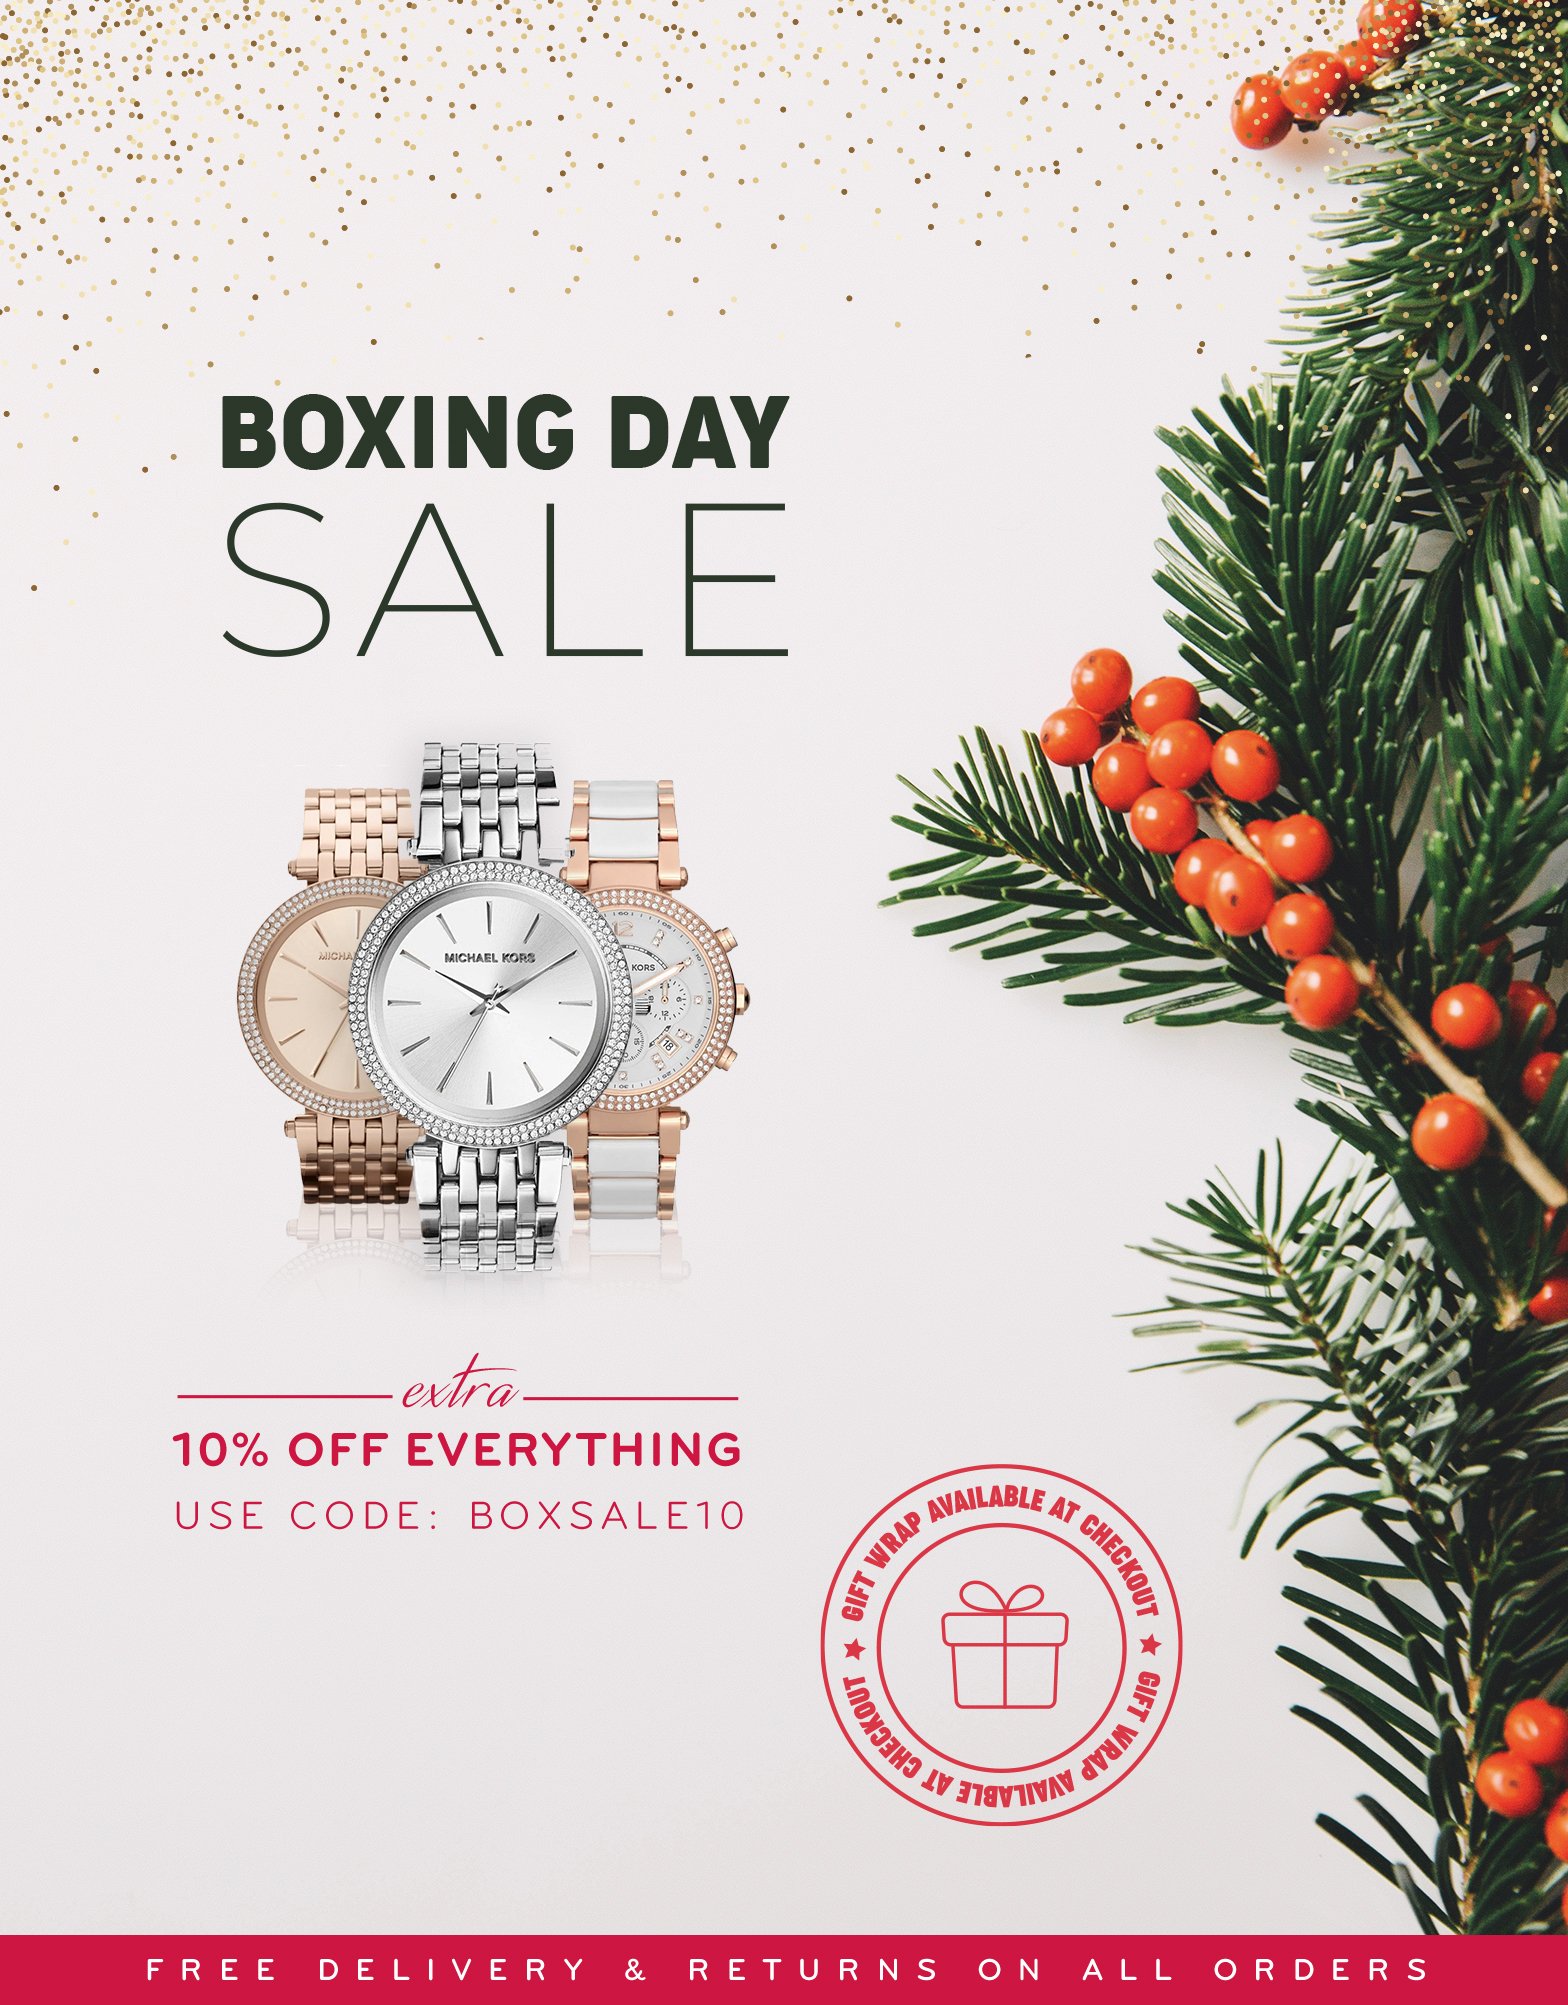 www.jbwatches.com: BOXING DAY SALE 